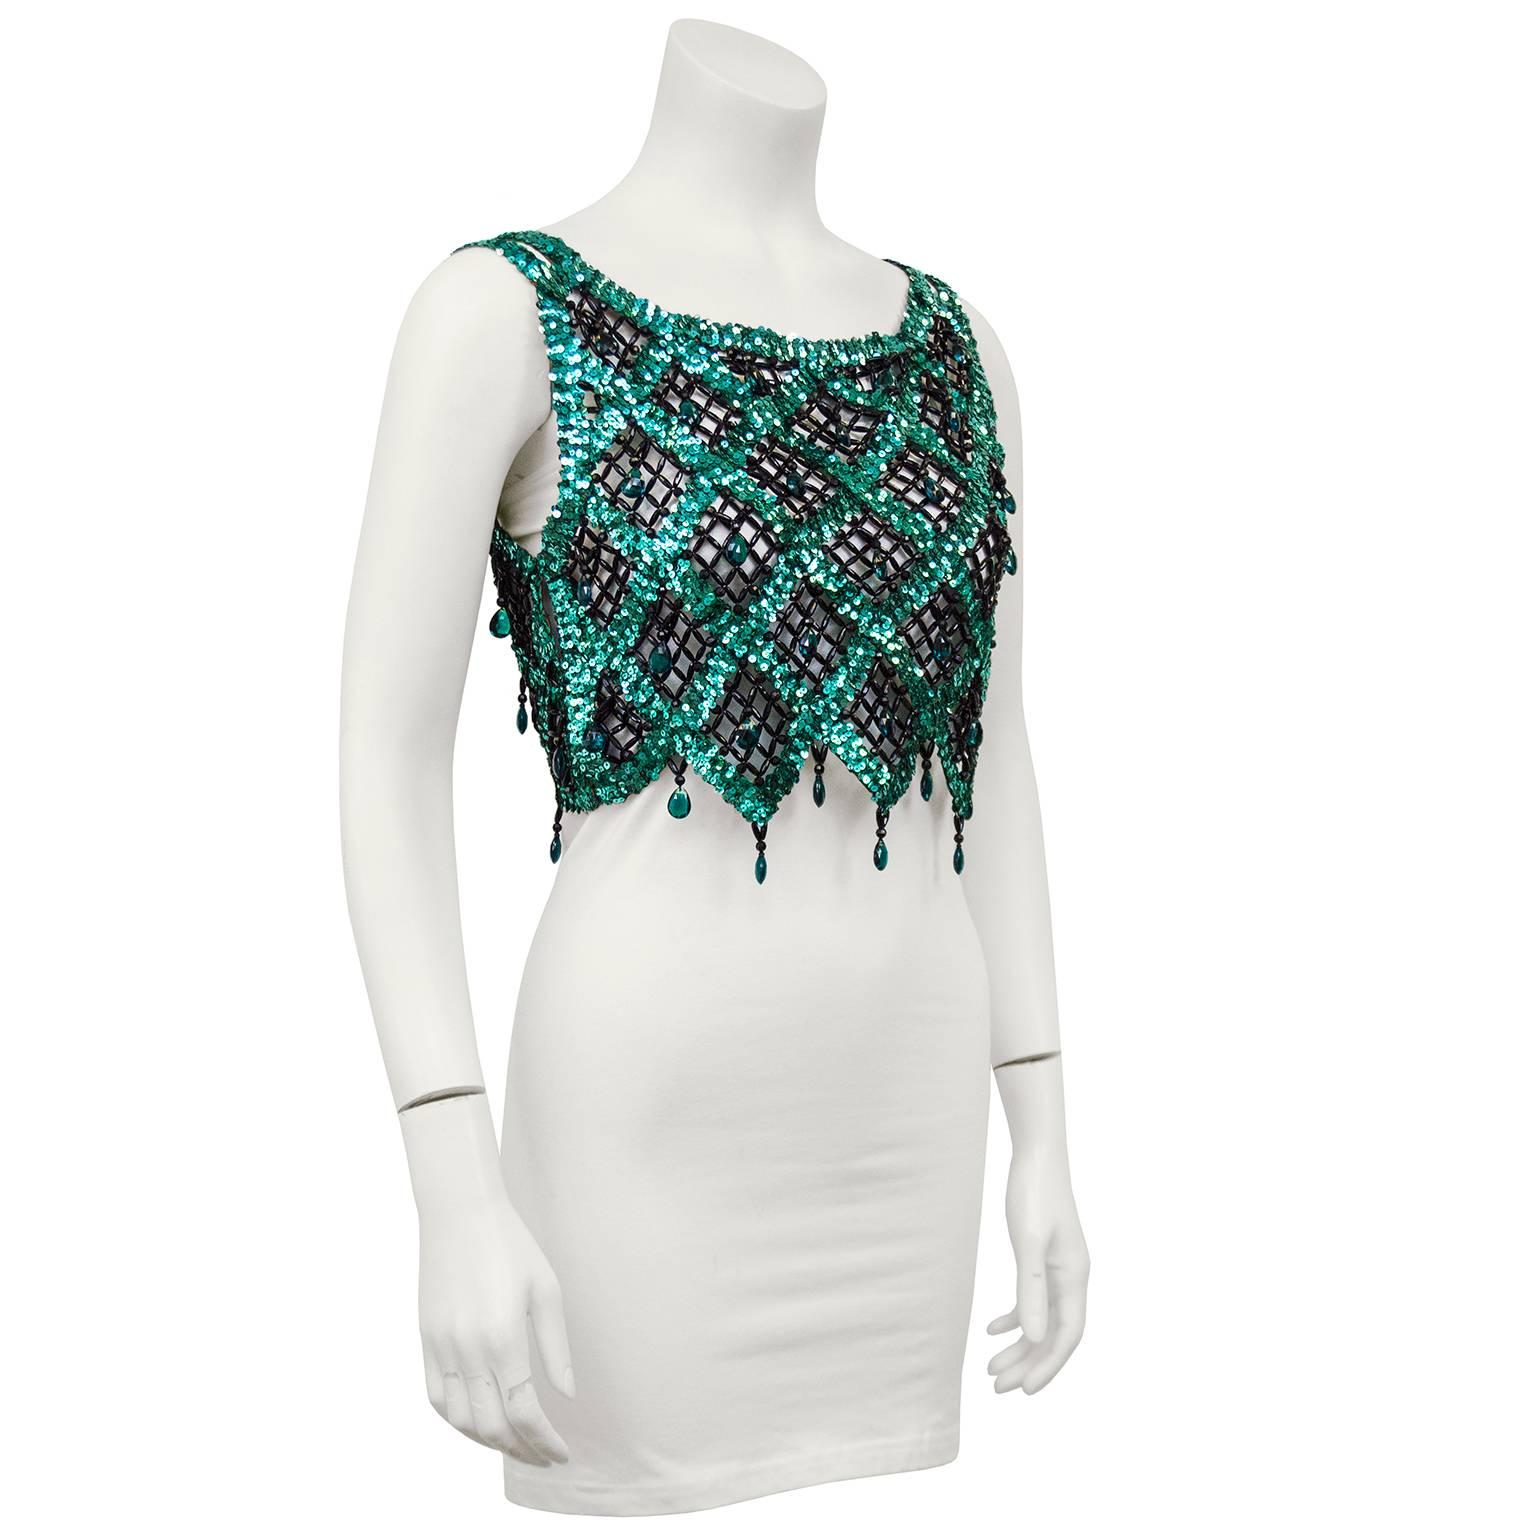 Gorgeous hand detailed 1960s sequin and beaded crop top. Teal sequins in diagonal stripes going both ways, creating diamond shapes throughout with a chevron hem. Small black beads create a net like detail. Large teal teardrop shaped beads in the